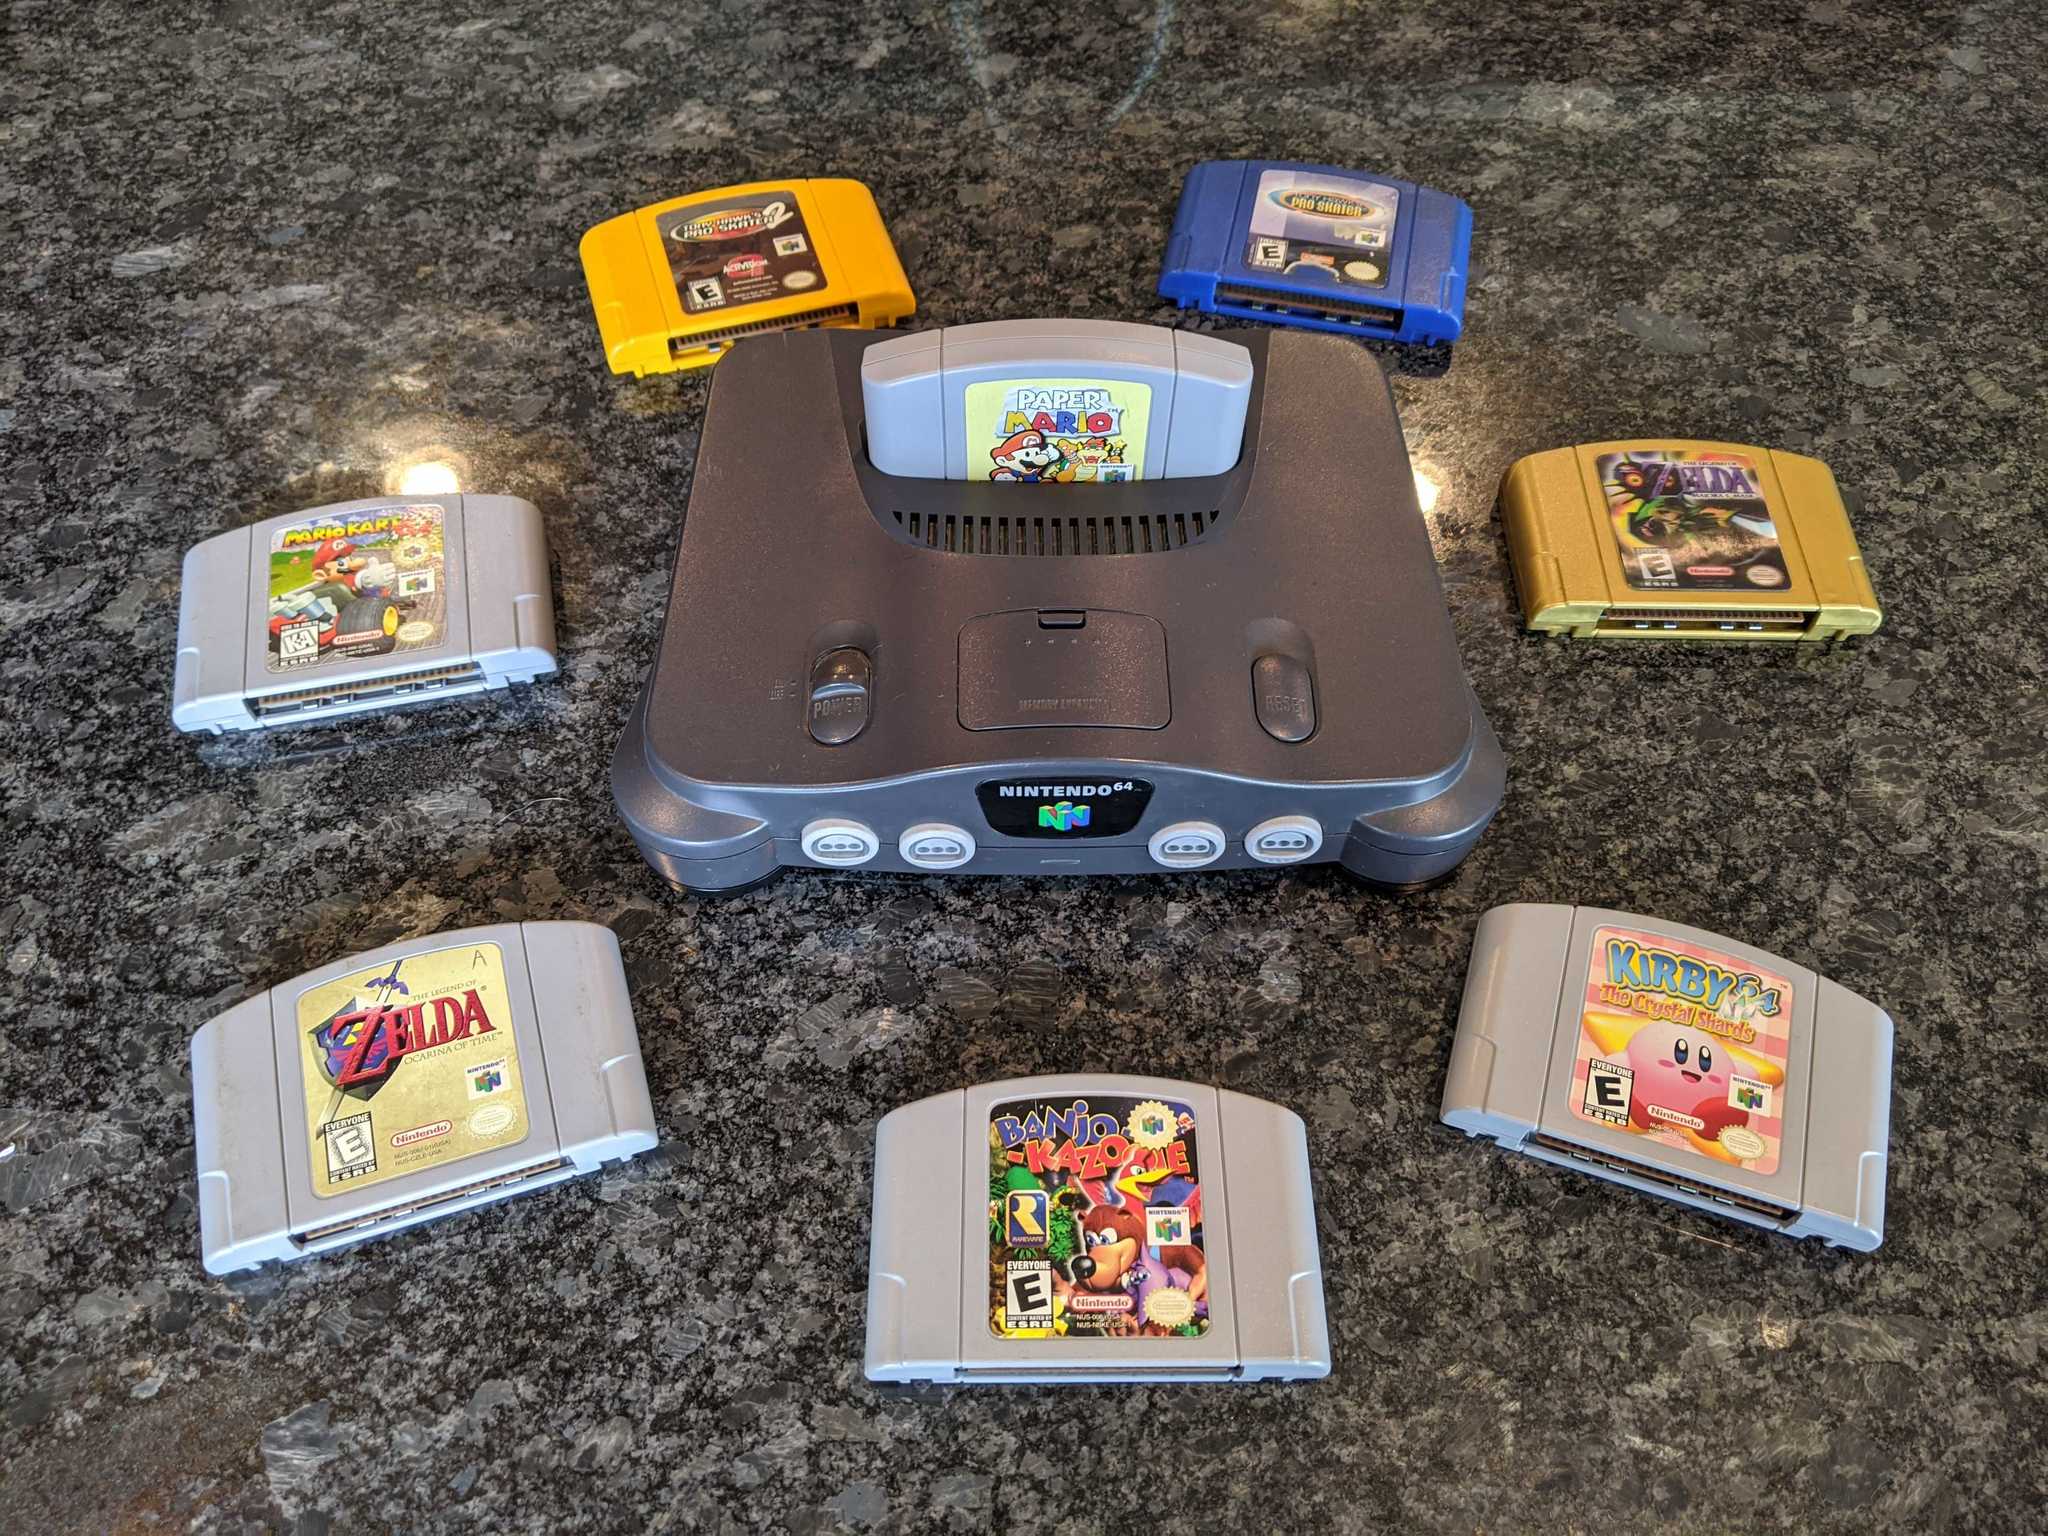 The world could use a Nintendo 64 Classic console right now